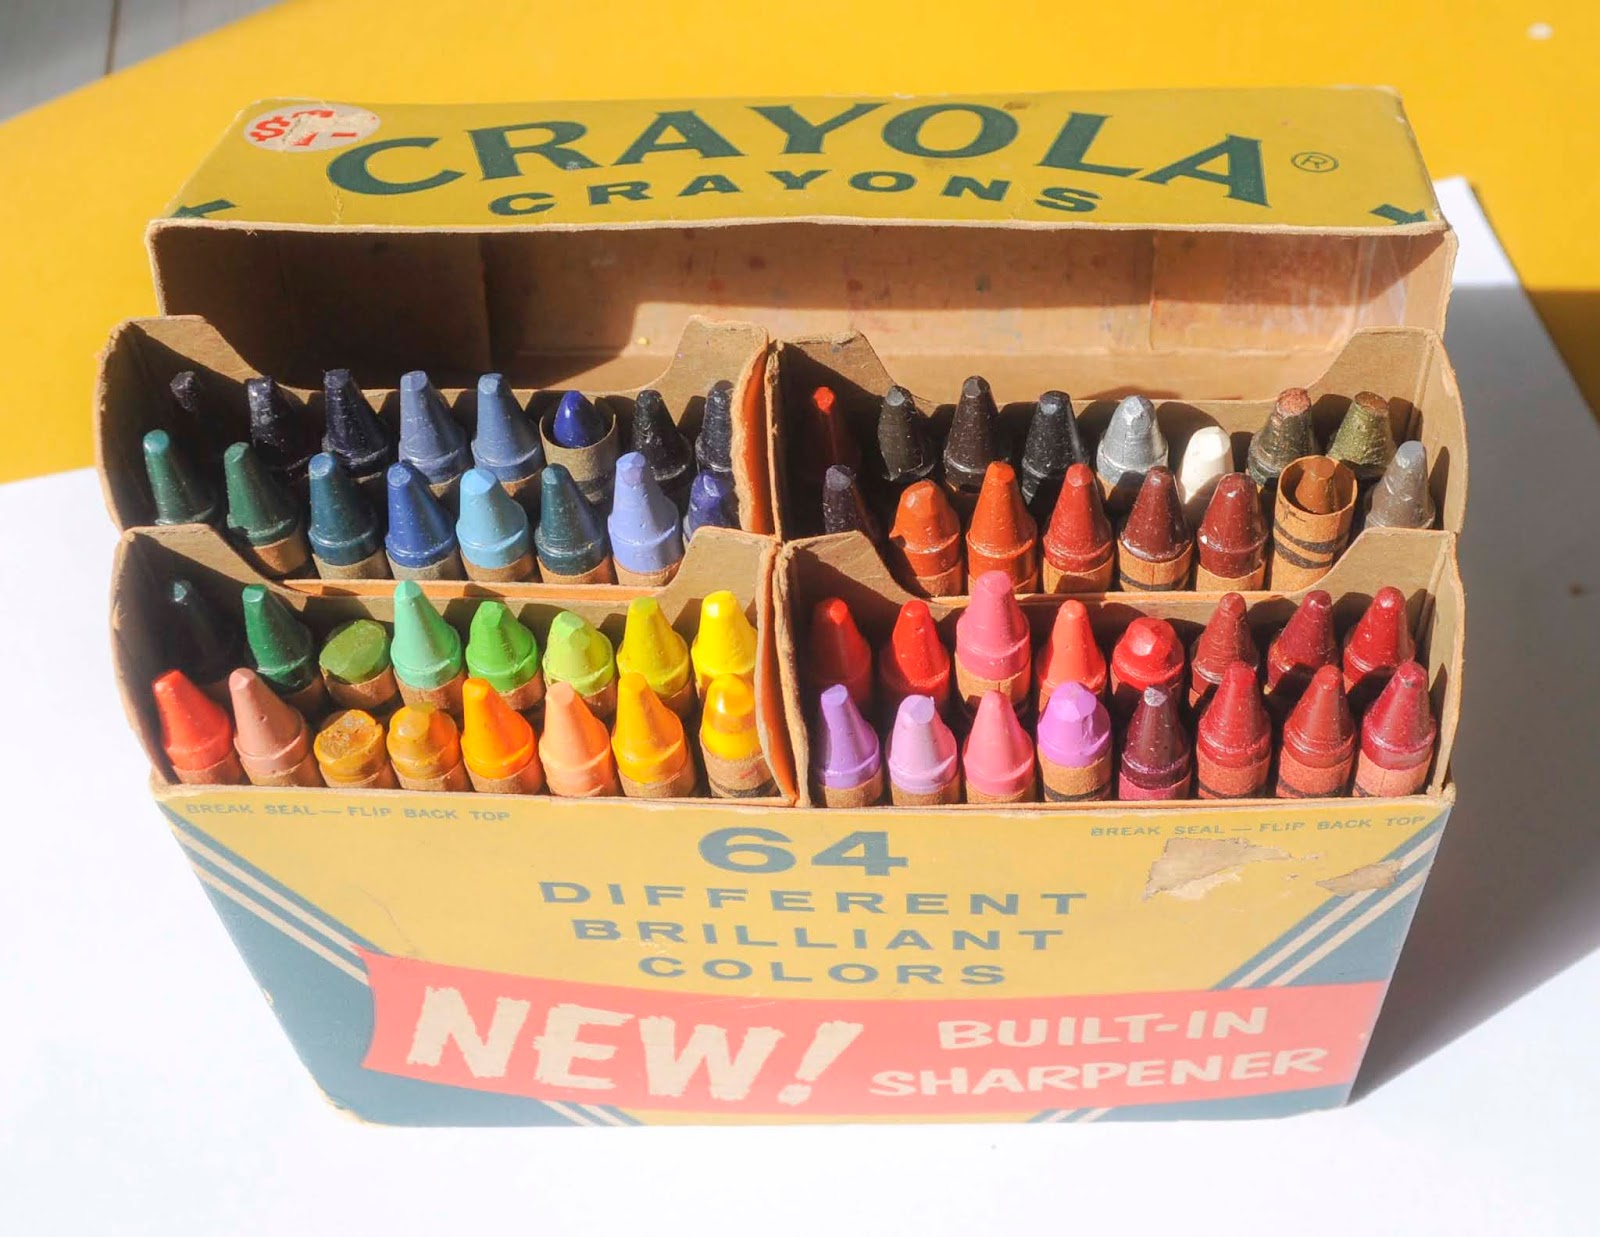  Crayola Classic Color Crayons in Flip-Top Pack with